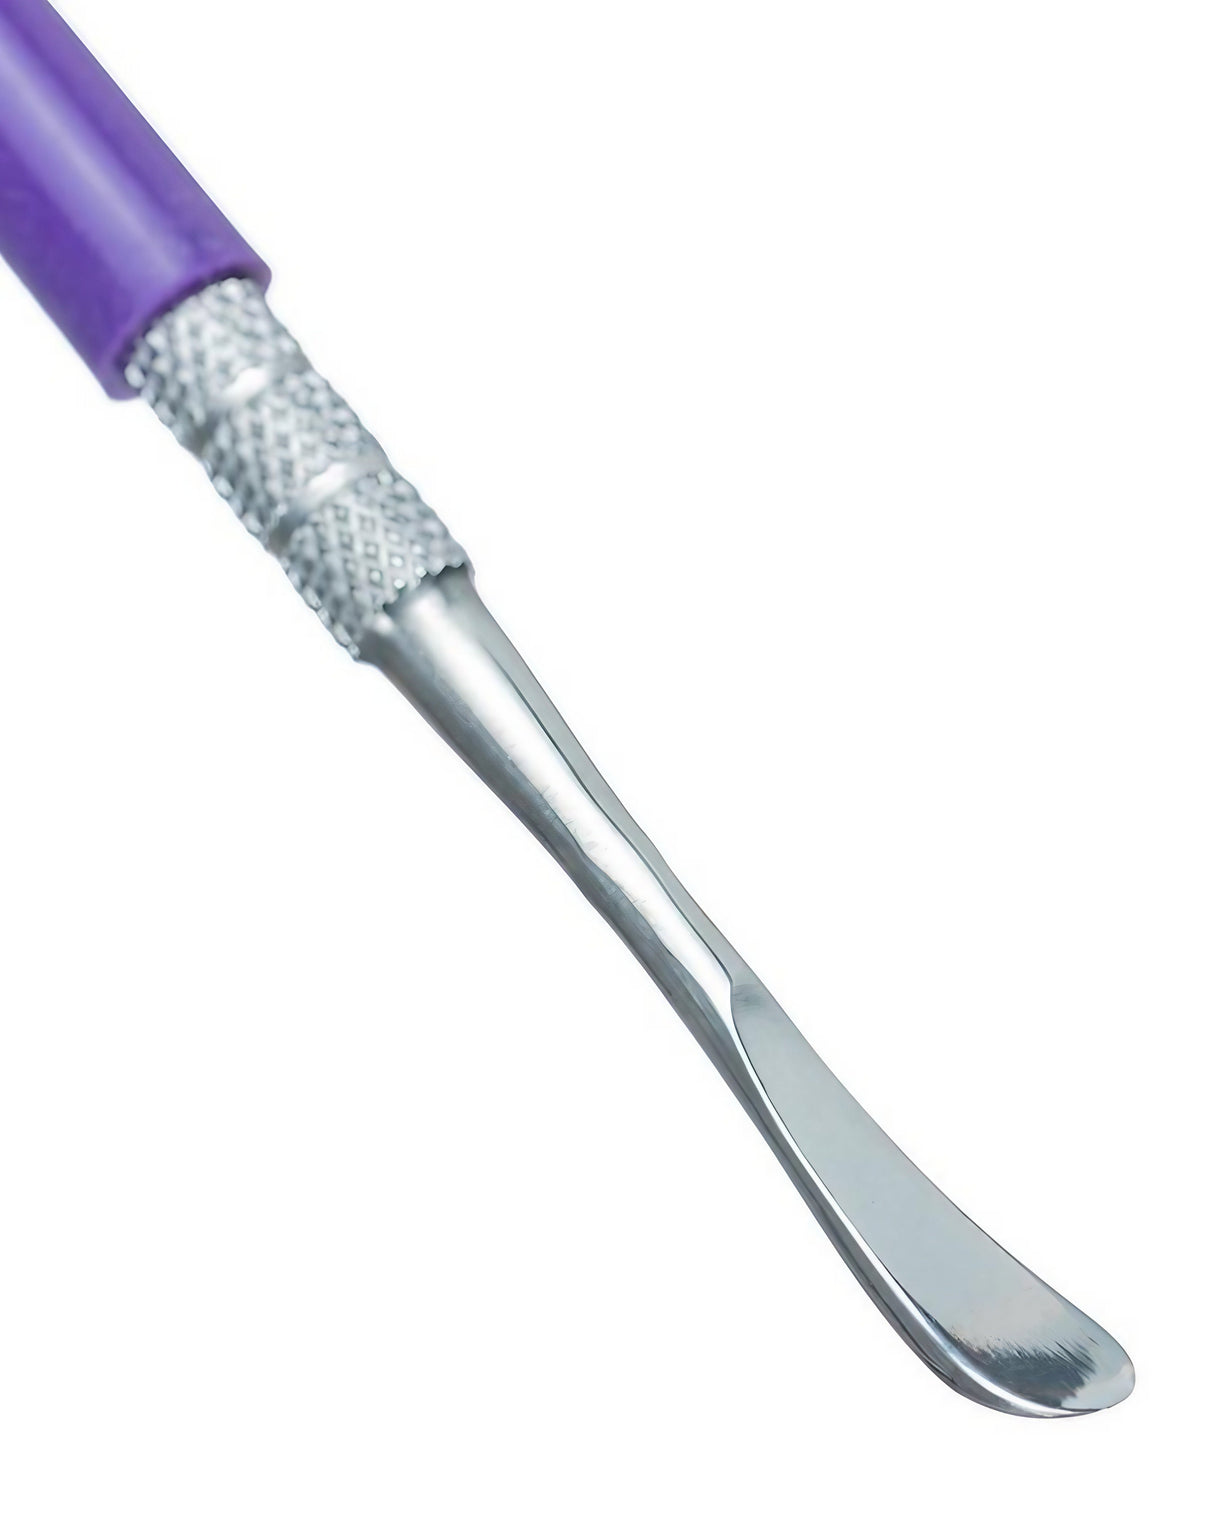 Close-up of LavaTech Double Sided Dabber with purple silicone grip for concentrates